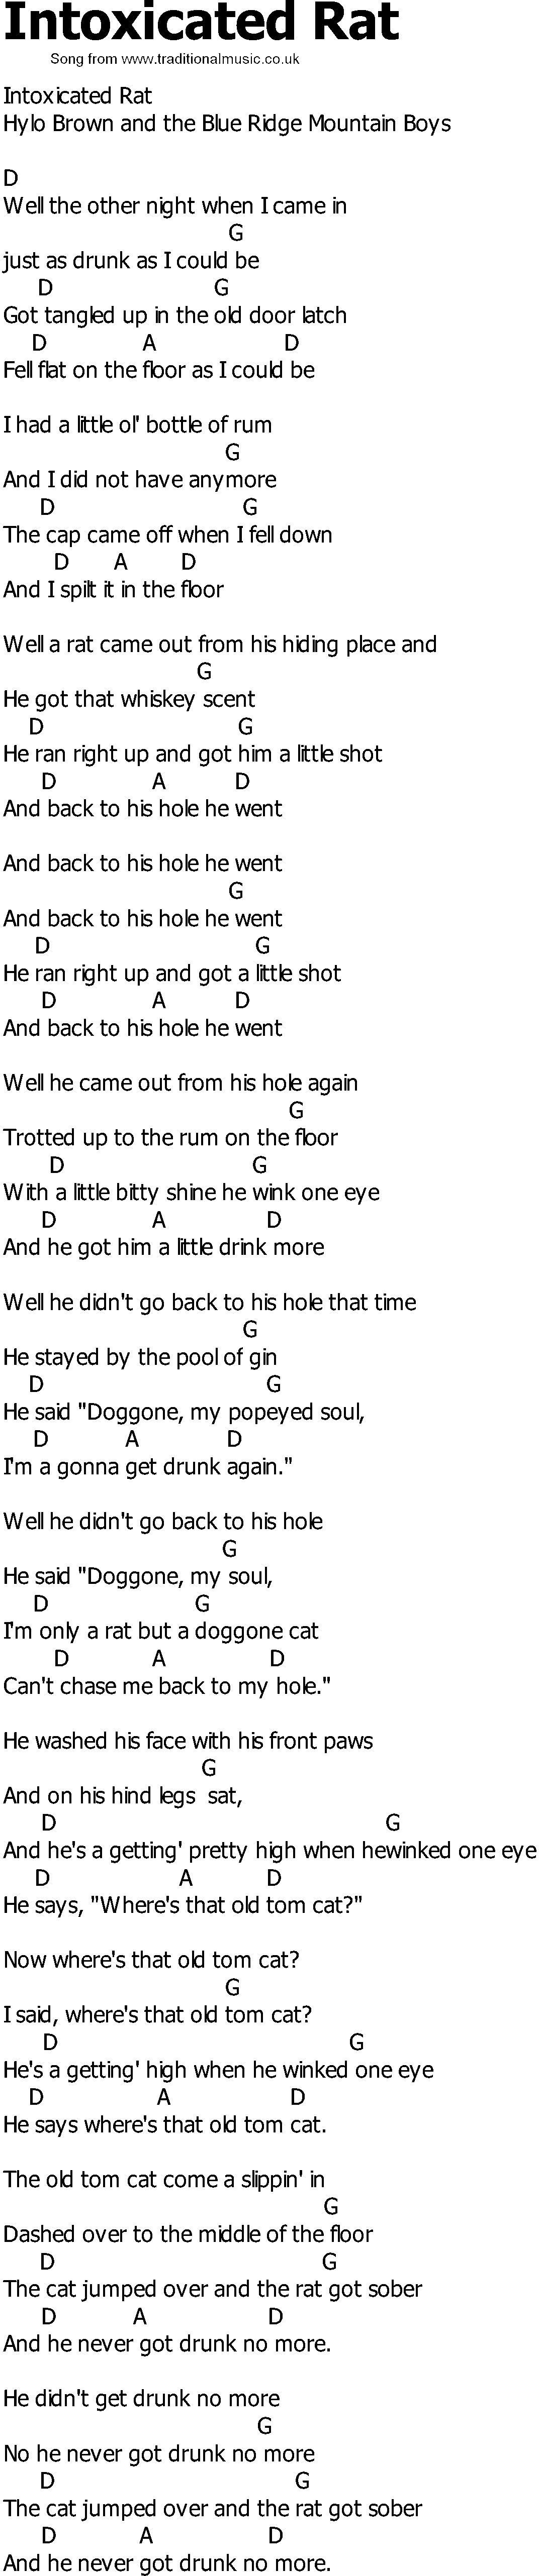 Old Country song lyrics with chords - Intoxicated Rat